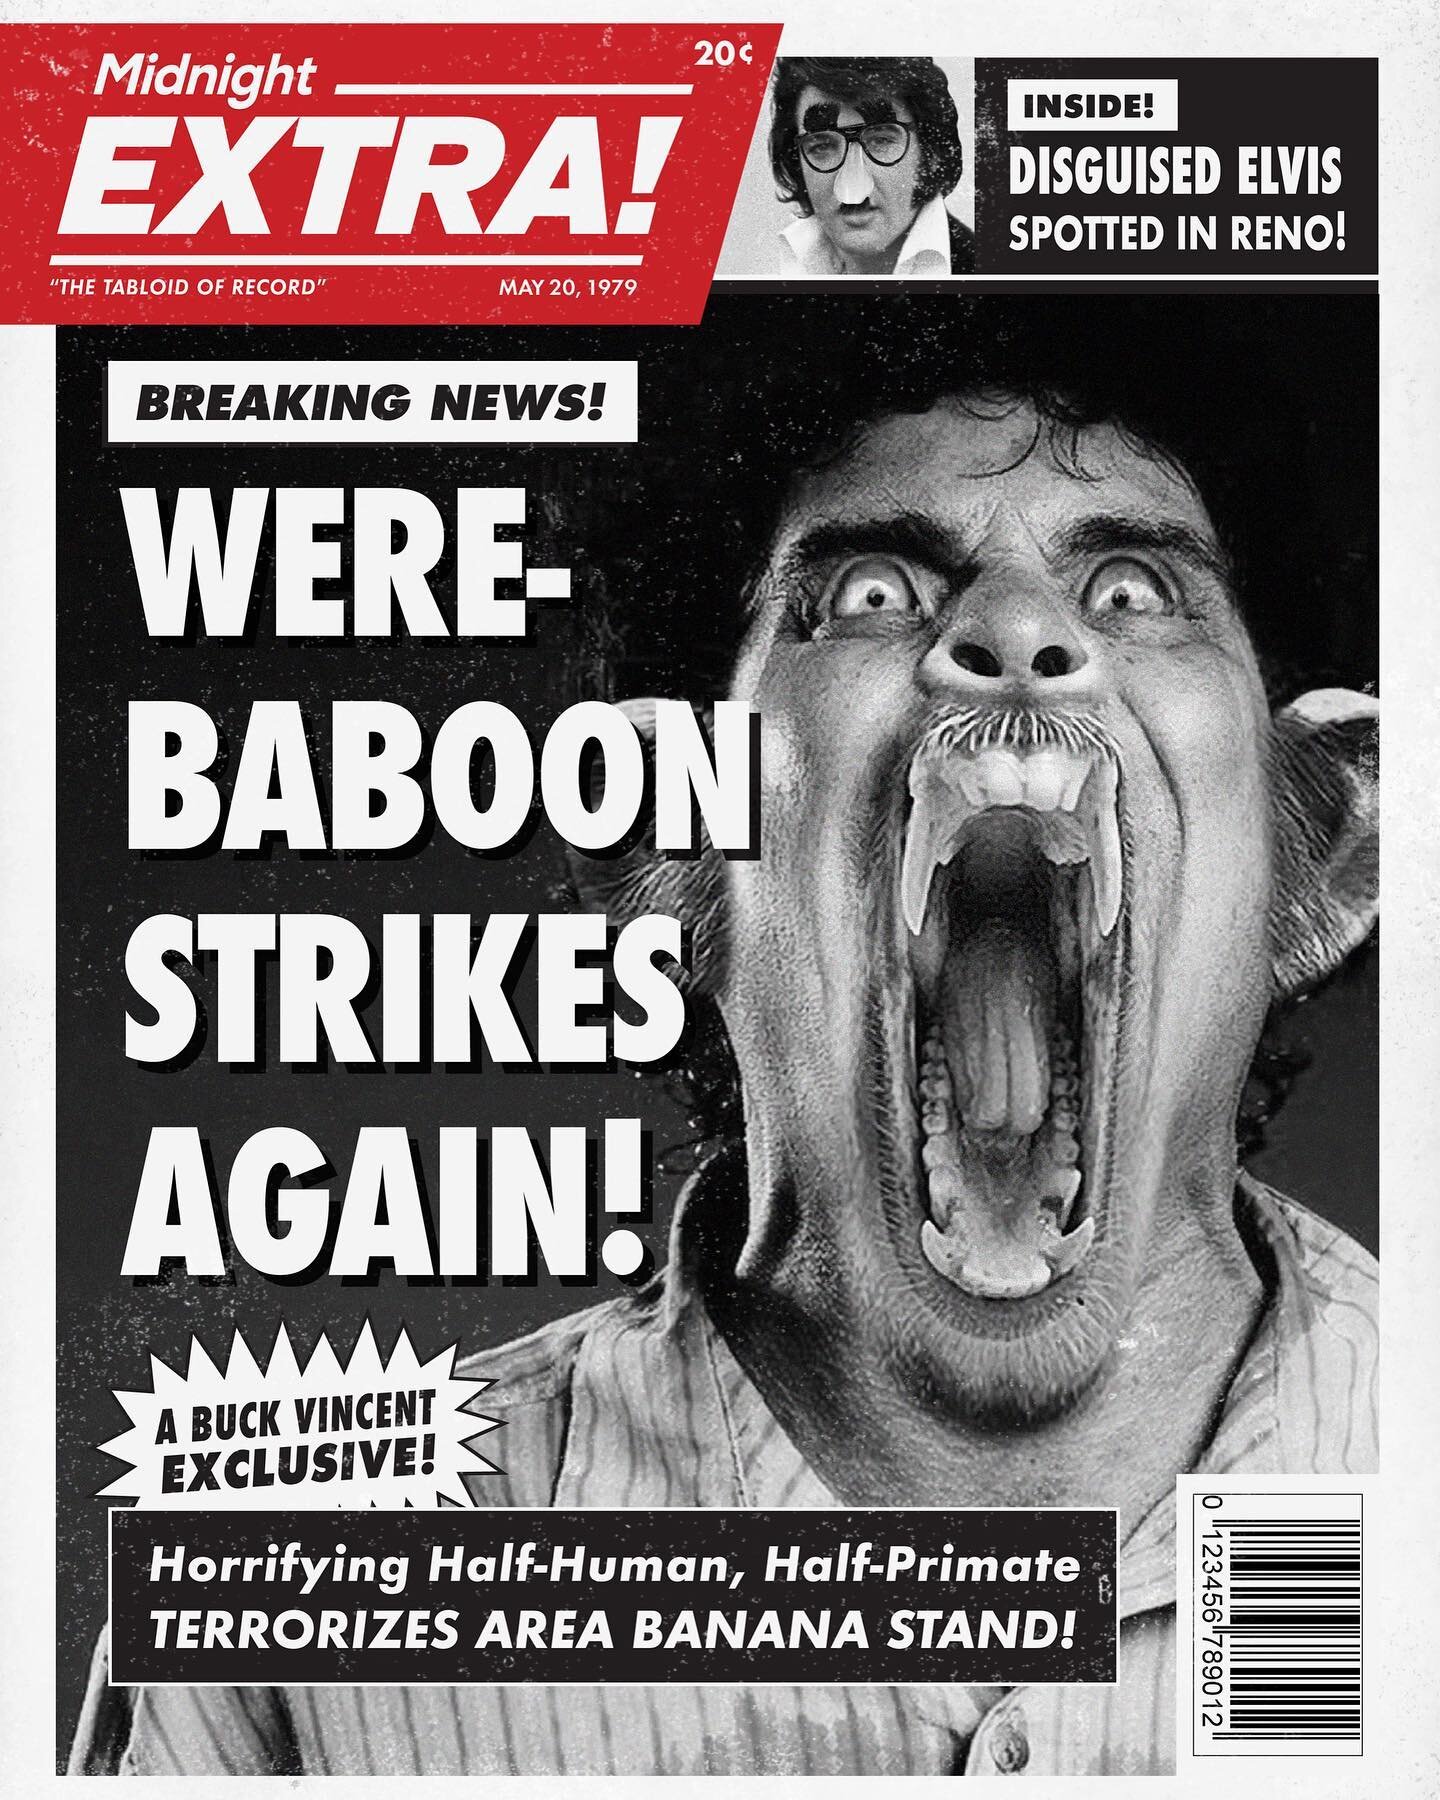 PRIMATE PANIC from 1979! Local banana retailers report HORRIFIC ATTACKS from a half-man HALF-BABOON! The creature seems drawn by the FULL MOON and PROWLS the local produce stands. NO FRUIT IS SAFE! Authorities are issuing a strict curfew on all MANGO